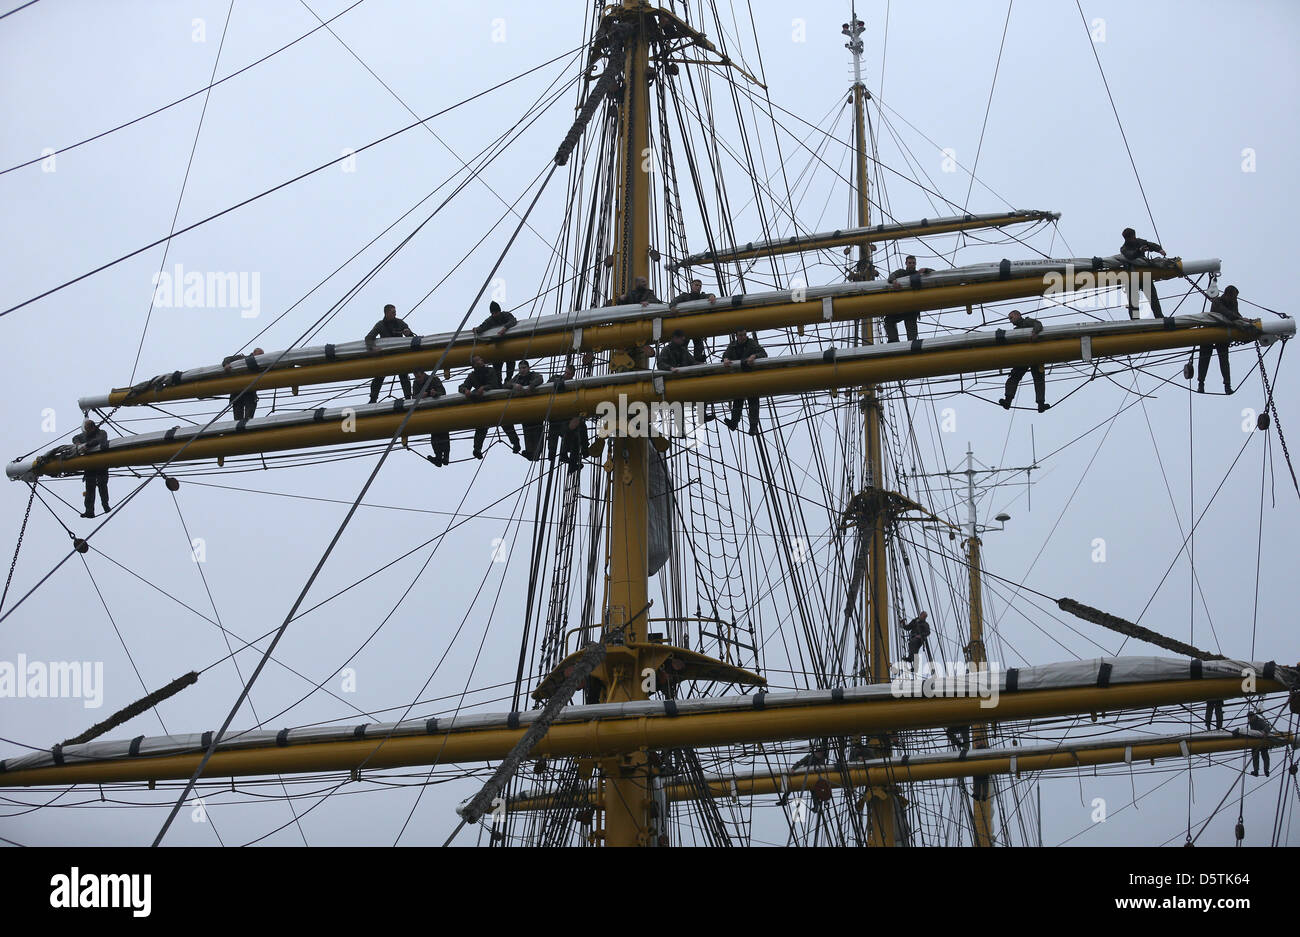 Sailors climb up the shrouds of the sail training ship of the German Navy, the 'Gorch Fock', as it leaves the naval port in Kiel, Germany, 27 November 2012. Two years after the training ship was forced to pause it now went on a trip with the new commander Risch. Photo: CHRISTIAN CHARISIUS Stock Photo